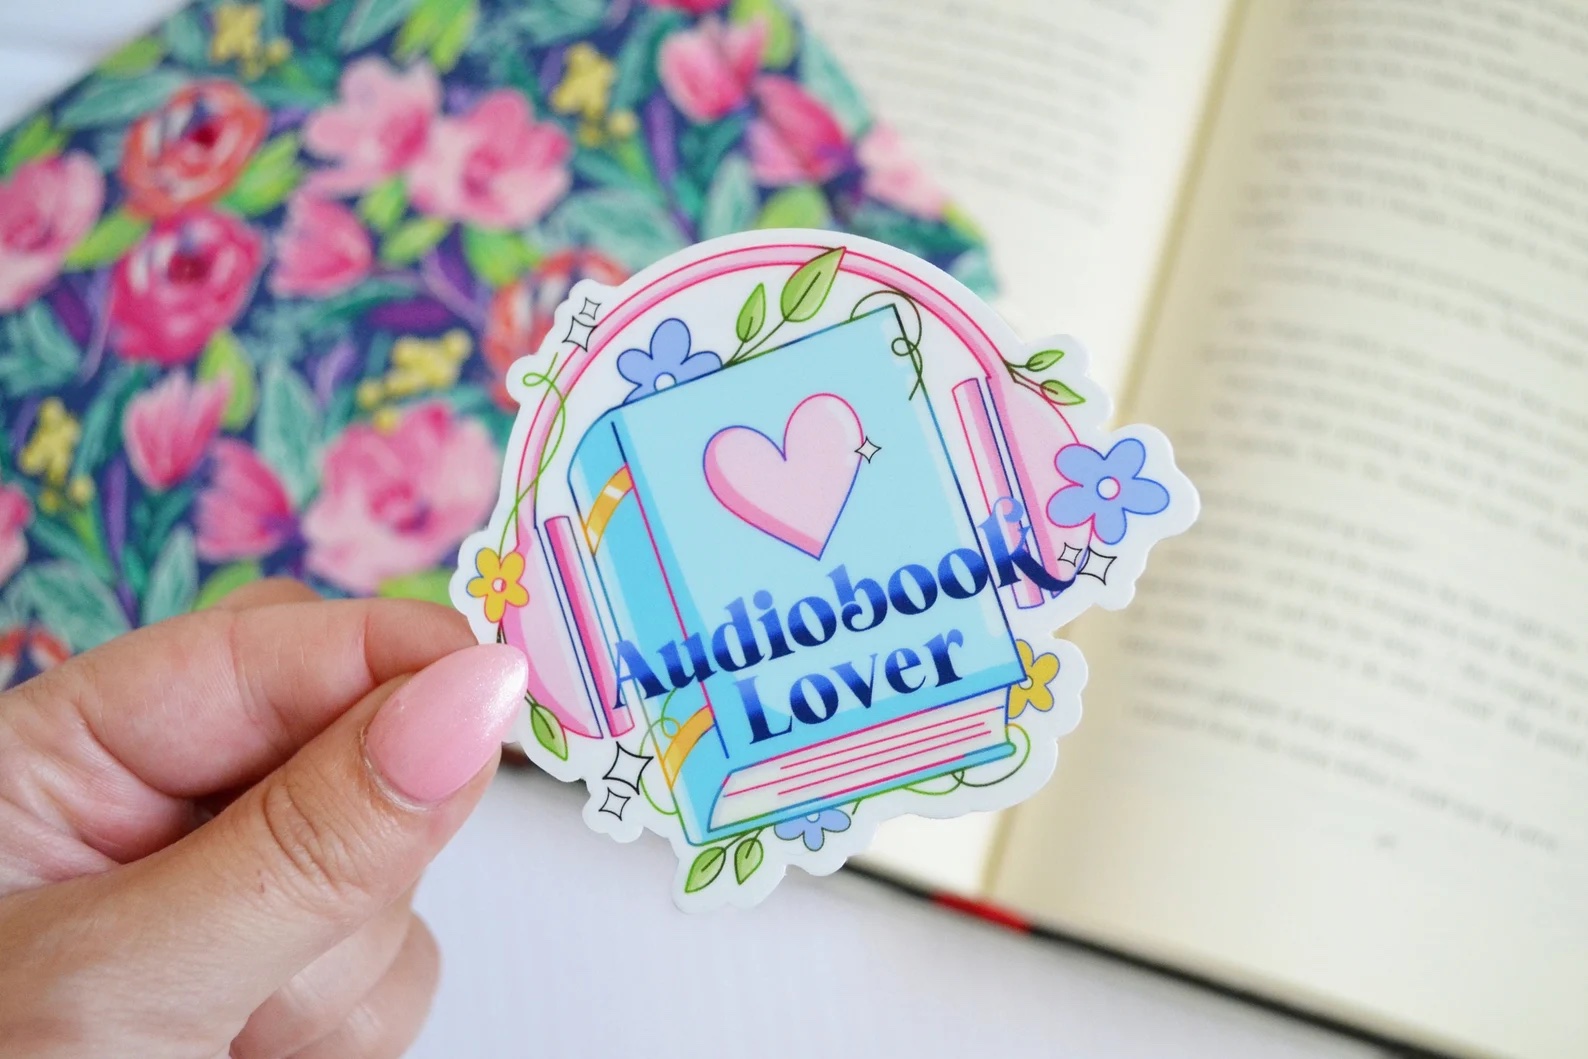 A photo of a pastel sticker featuring a book with headphones over it. The text on the sticker says, "Audiobook Lover"